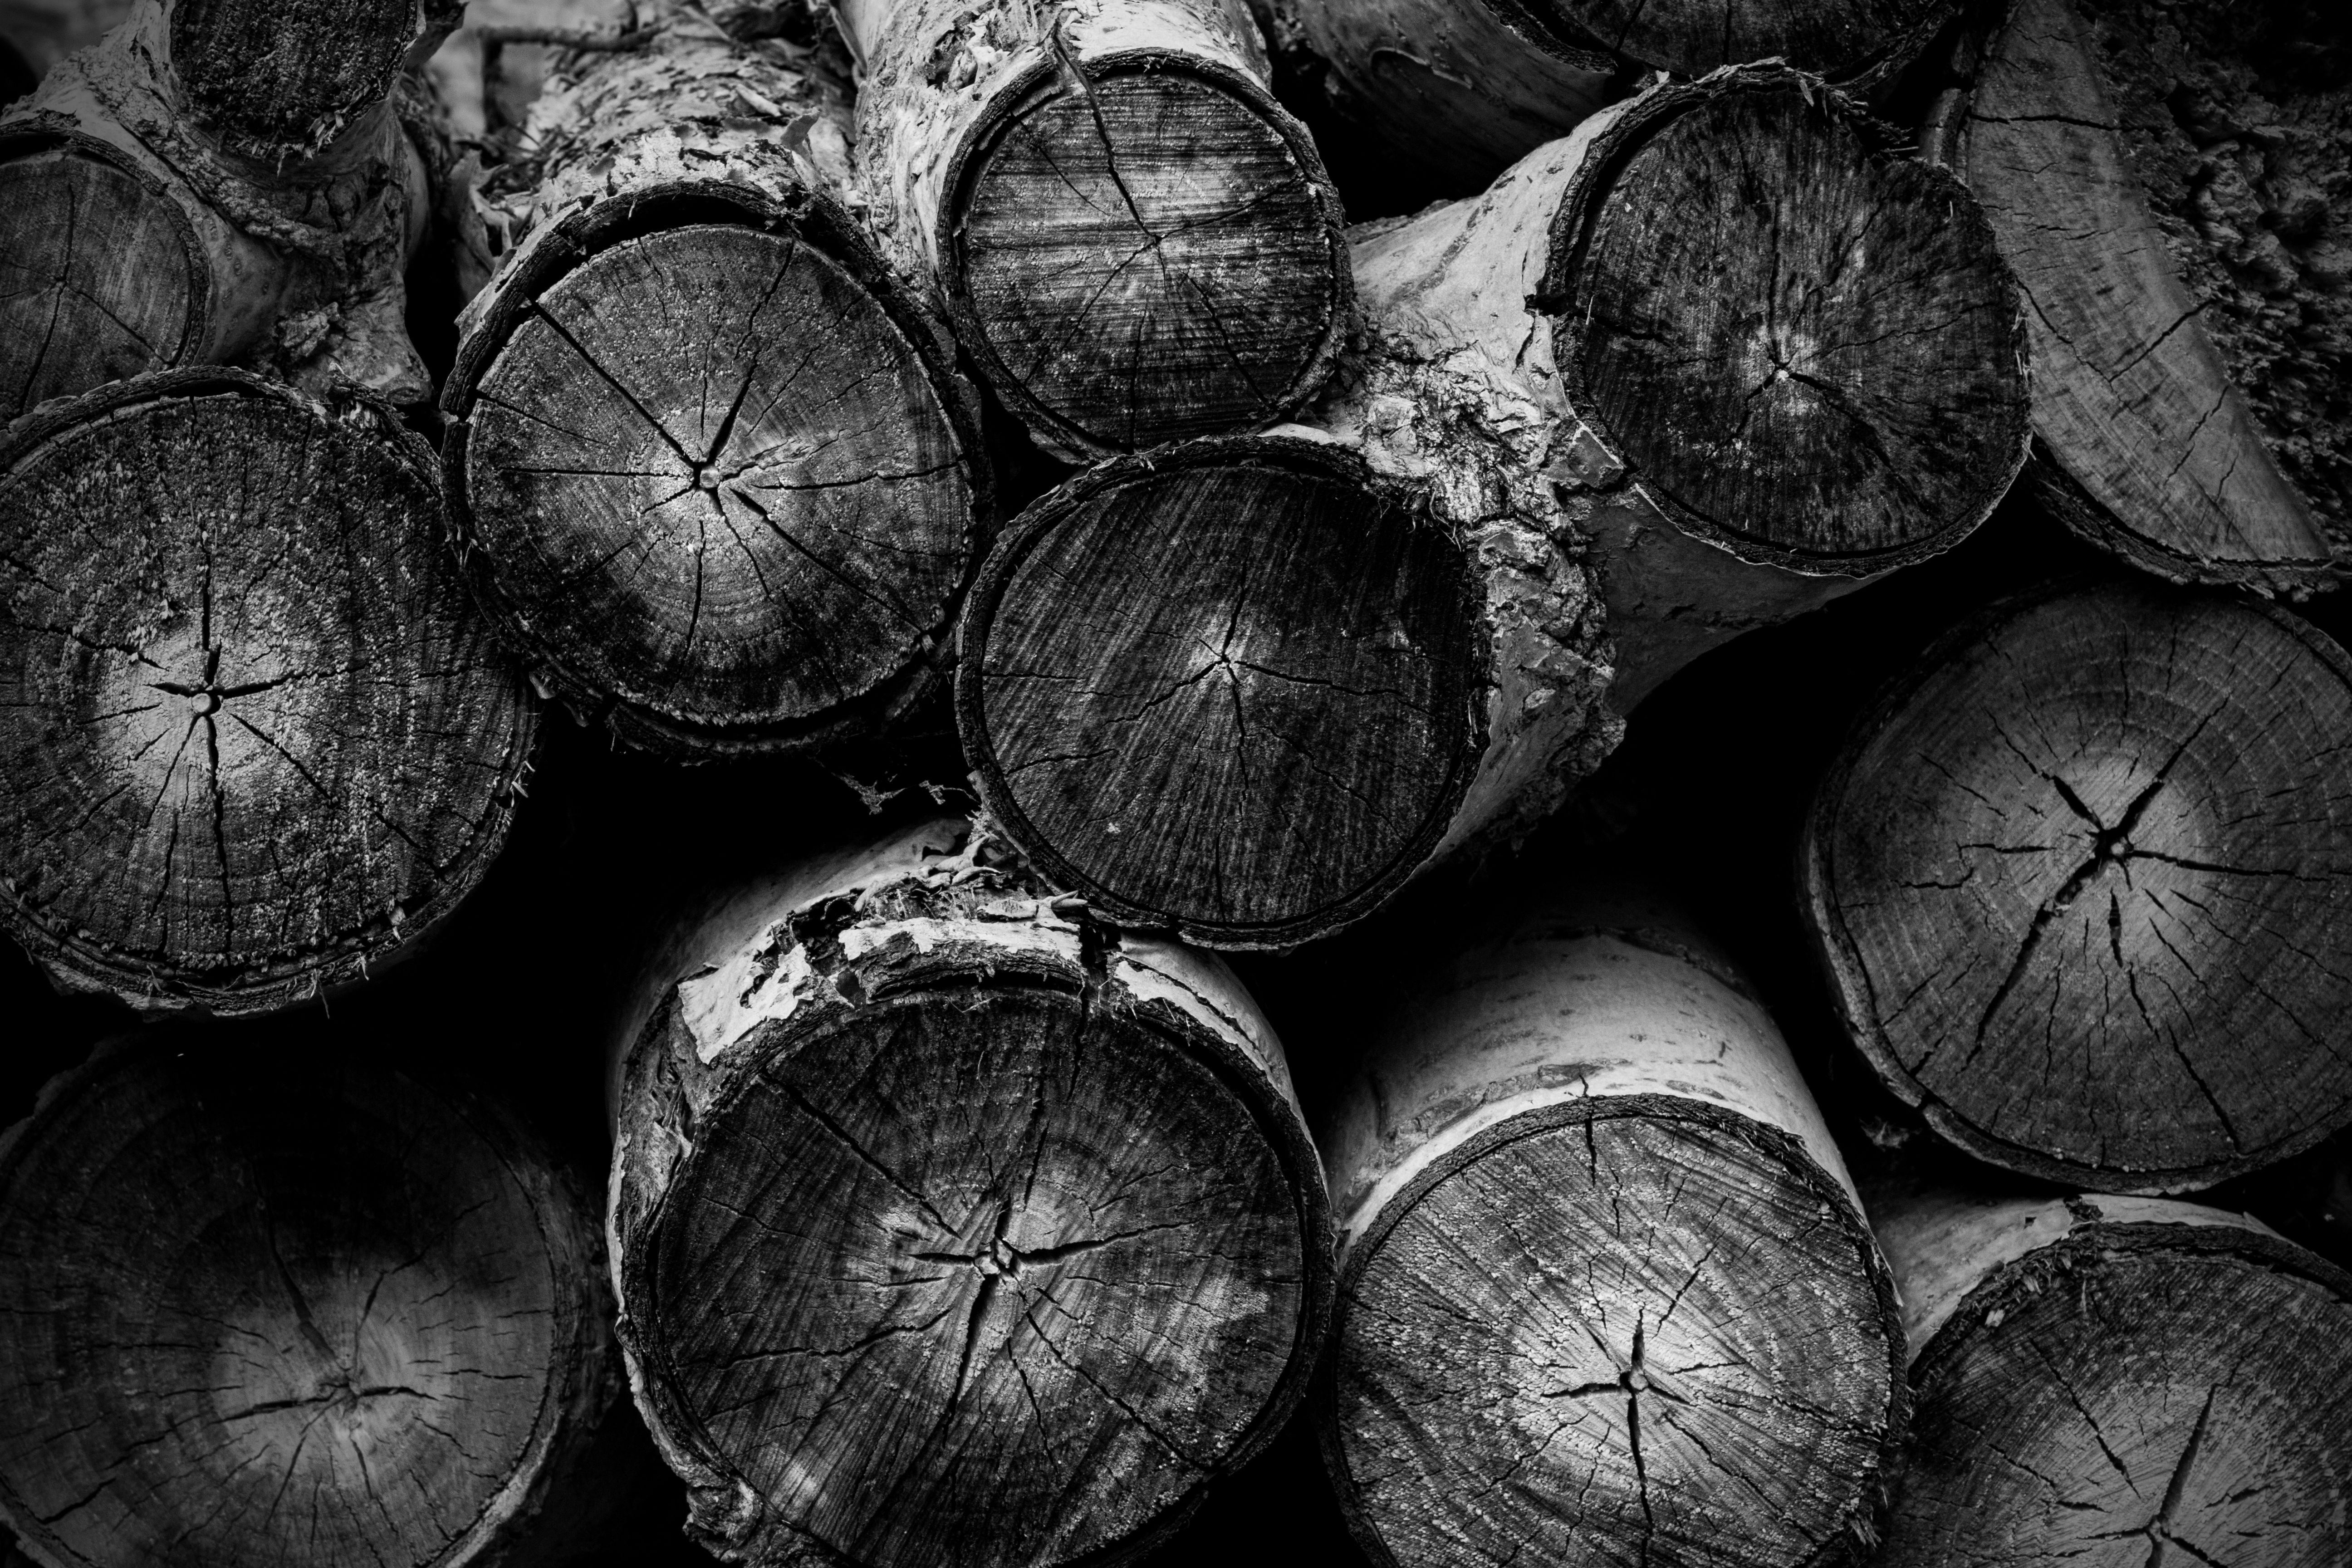 Pacing Leopard Abstracts Wood pile | Abstract Photography ...